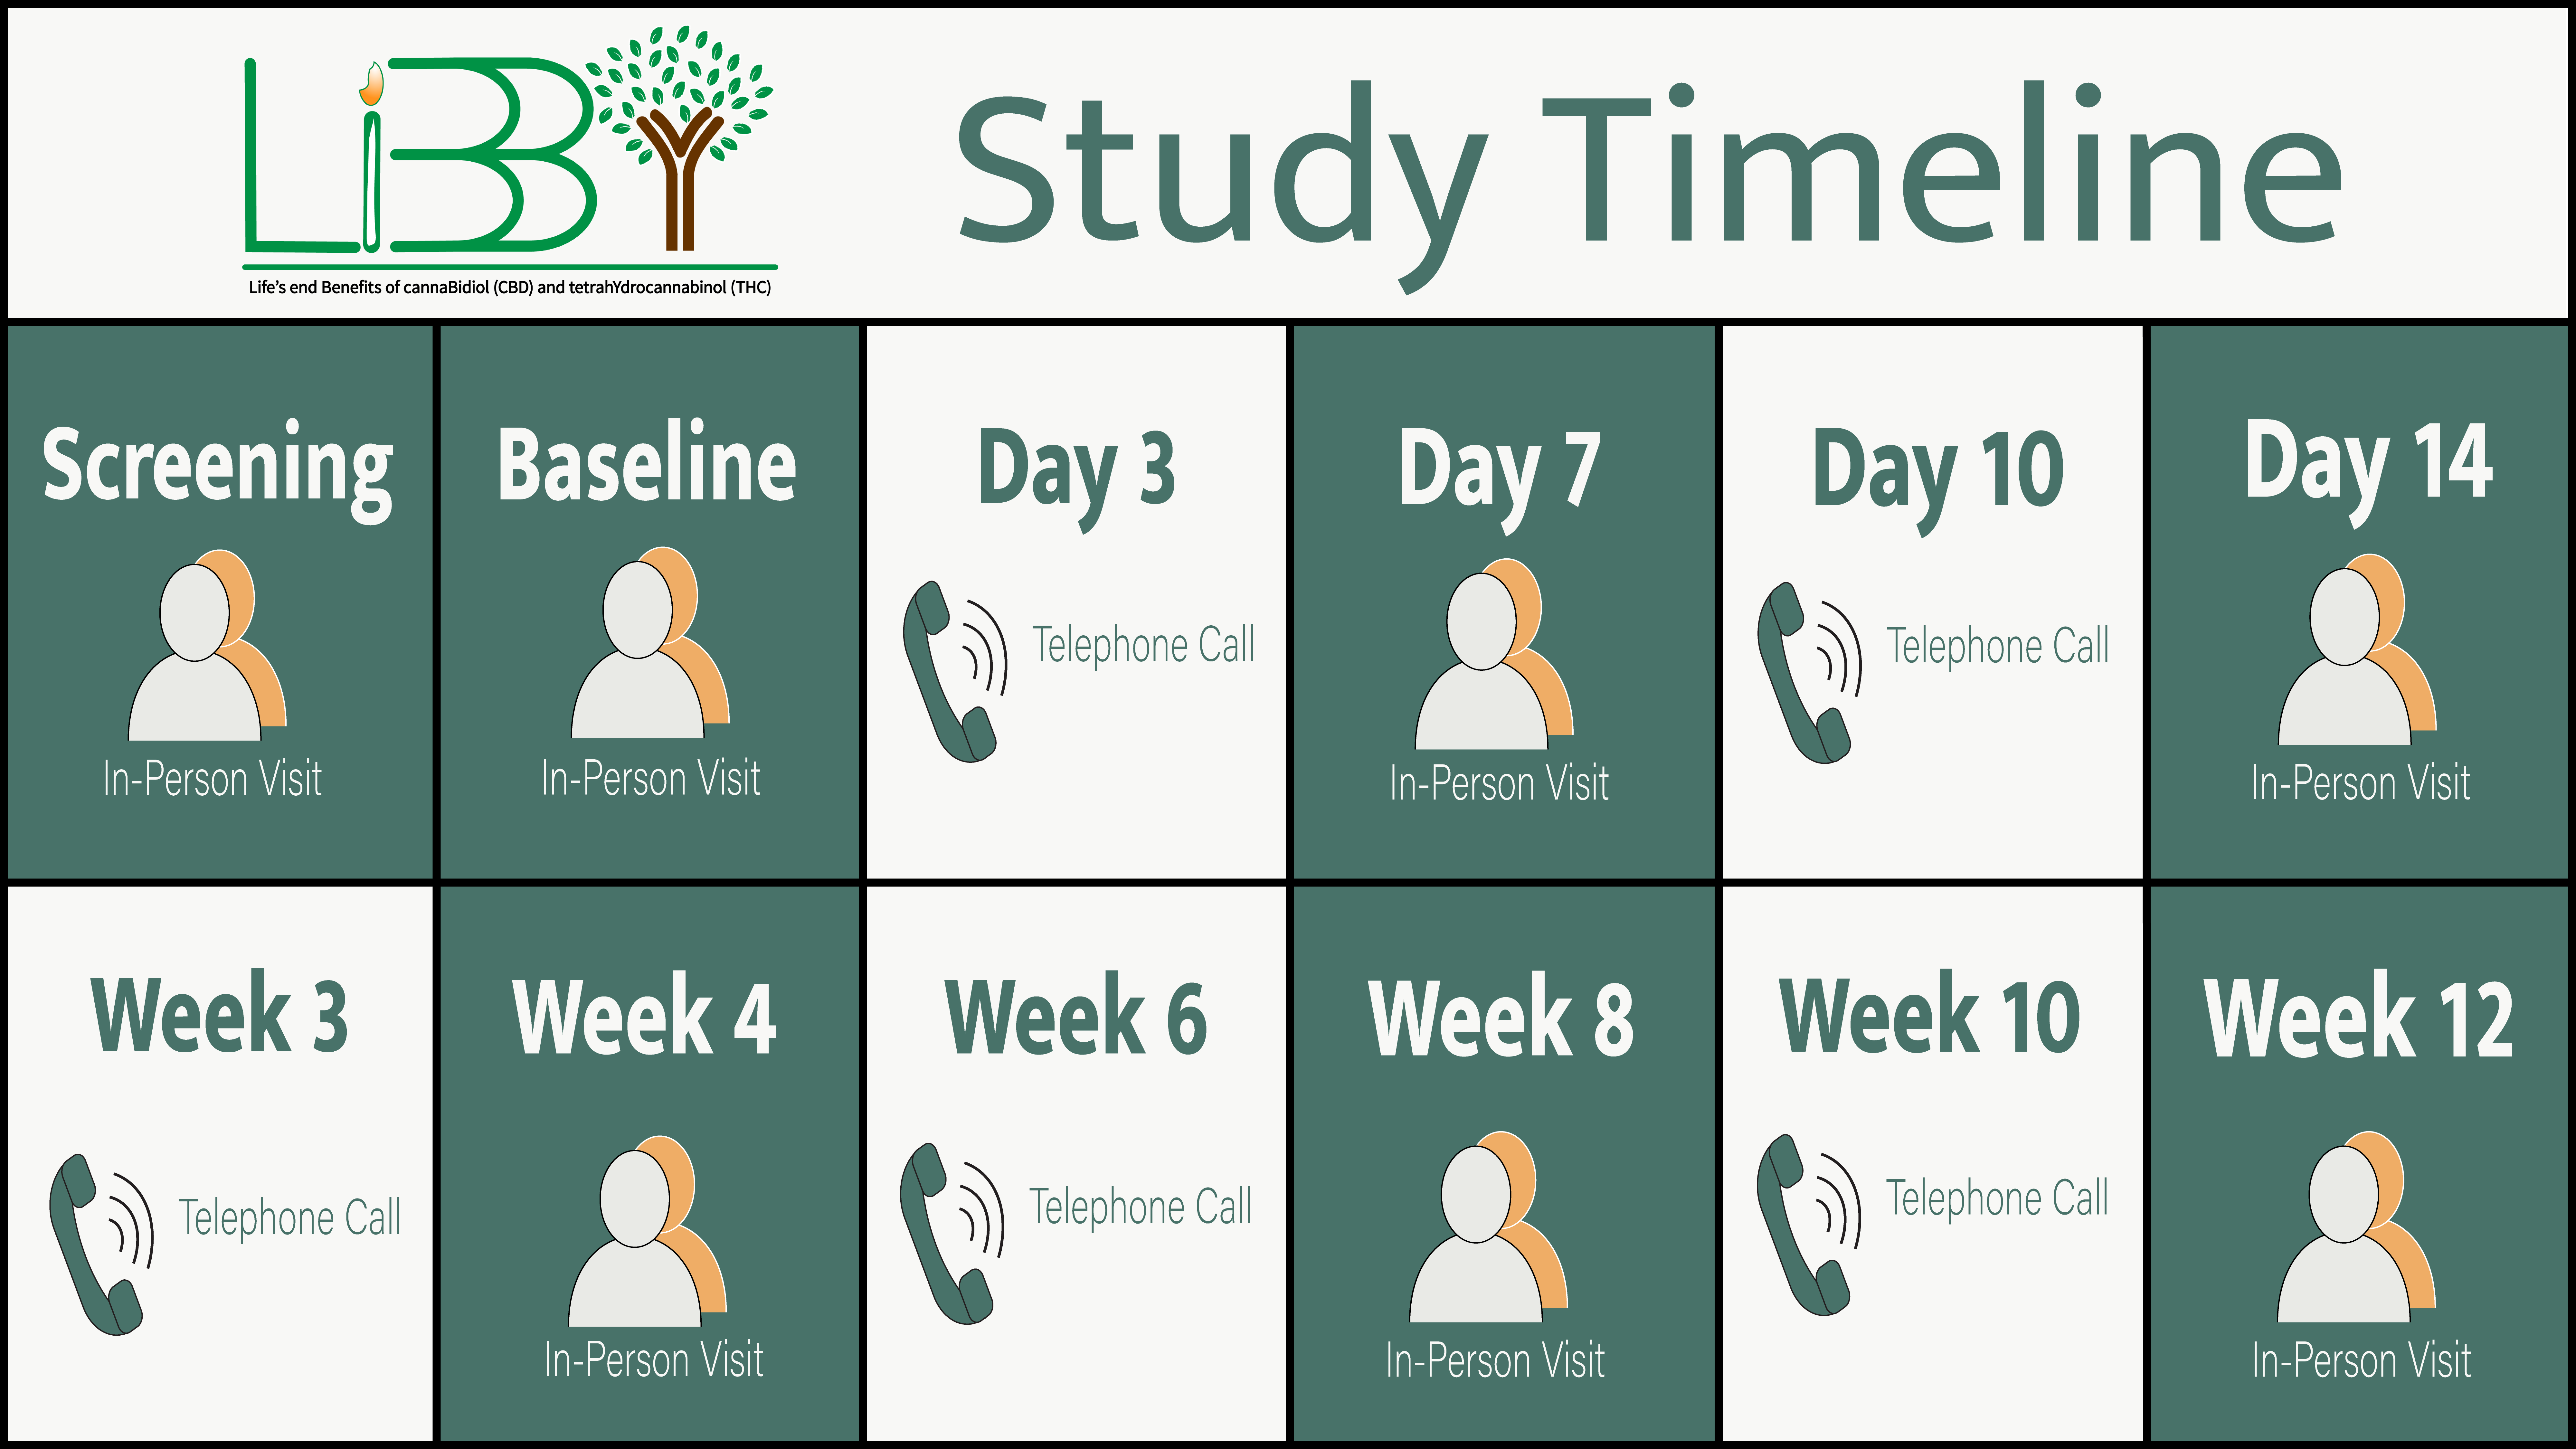 Image of the study's timeline